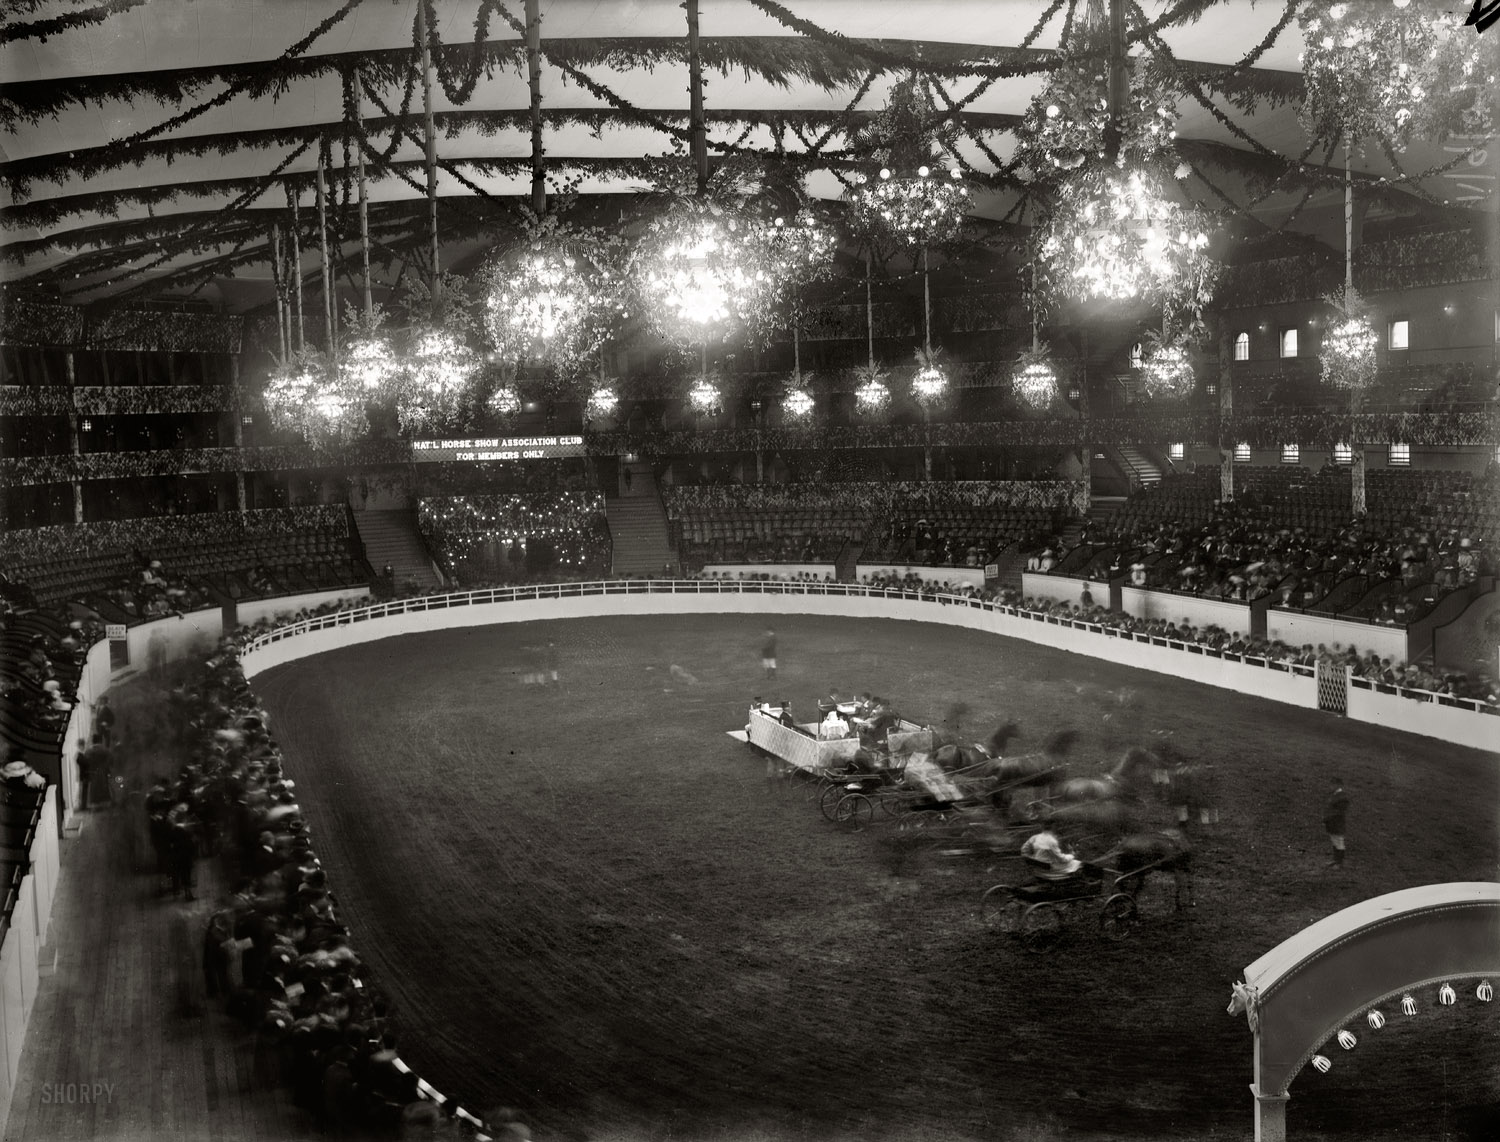 November 1909. The 25th annual National Horse Show at Madison Square Garden in New York, in one of those ultra-detailed yet otherworldly views so characteristic of large-format glass negatives (8x10 inches here). View full size.